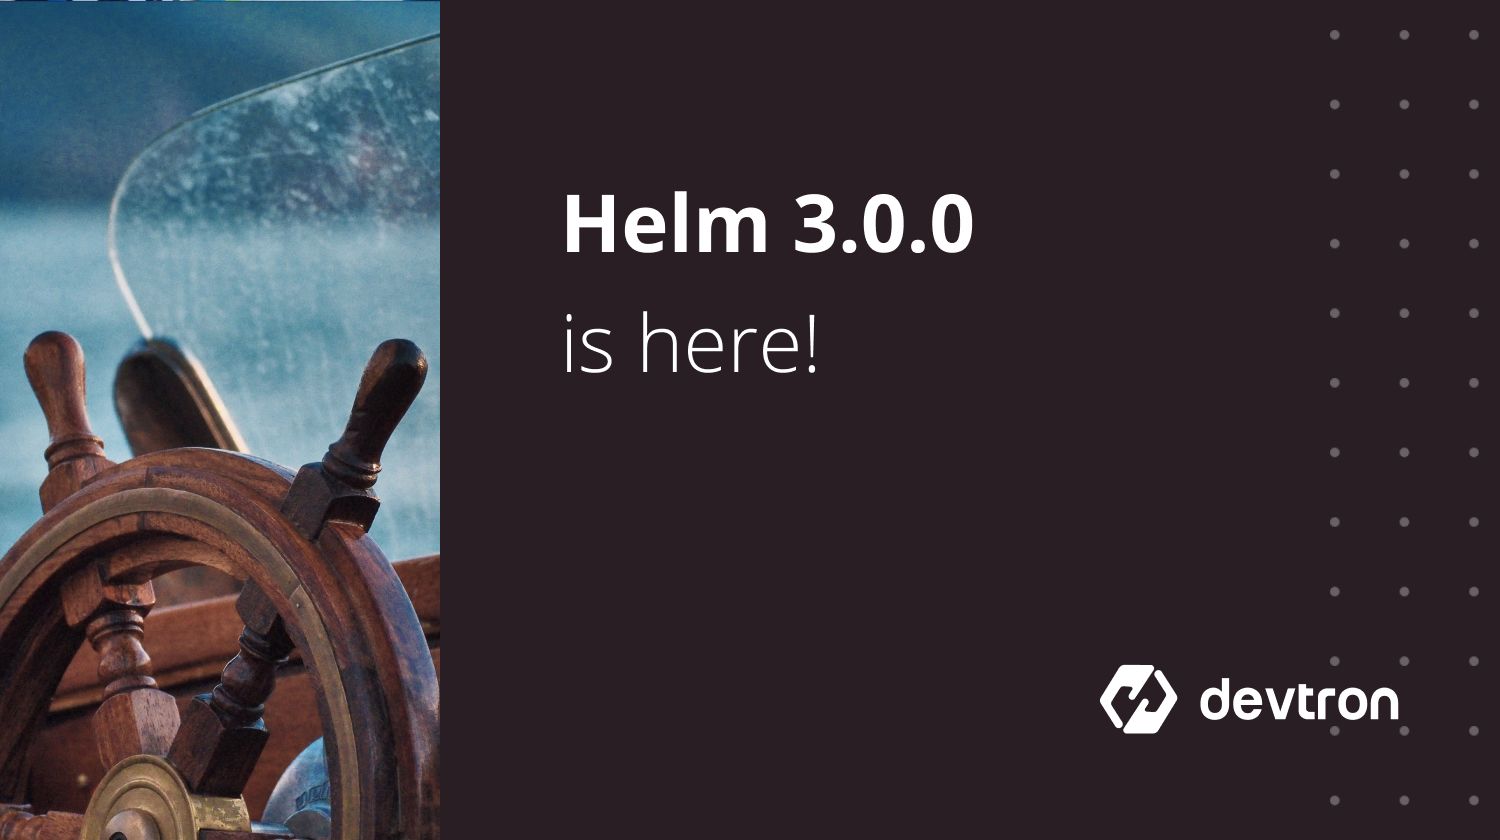 What you should know about Helm 3